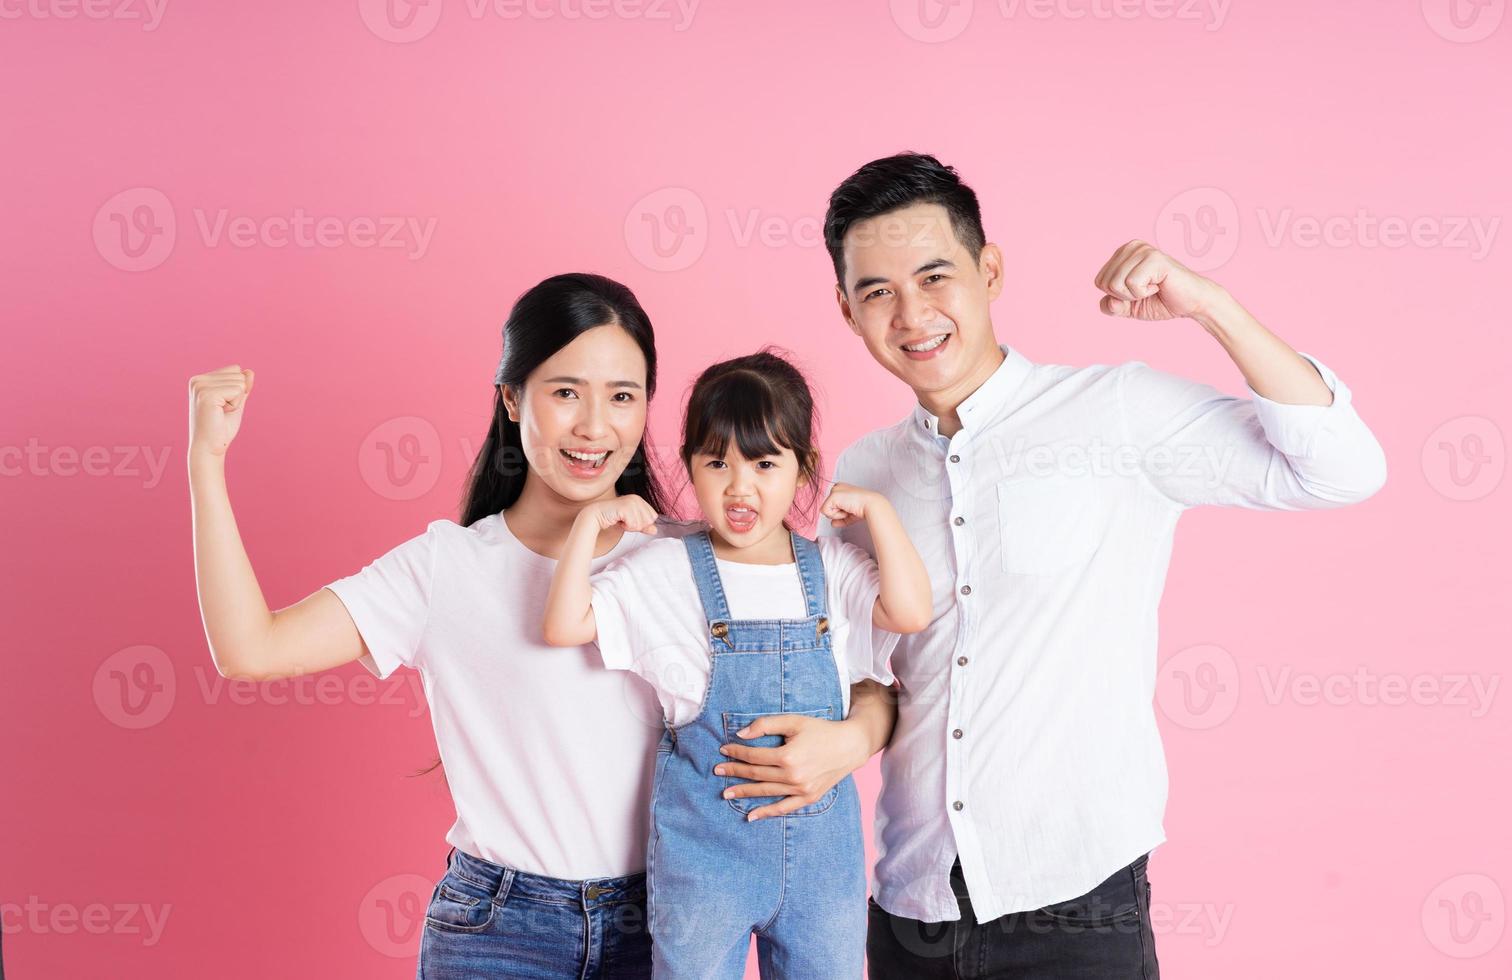 happy young asian family image, isolated on pink background photo